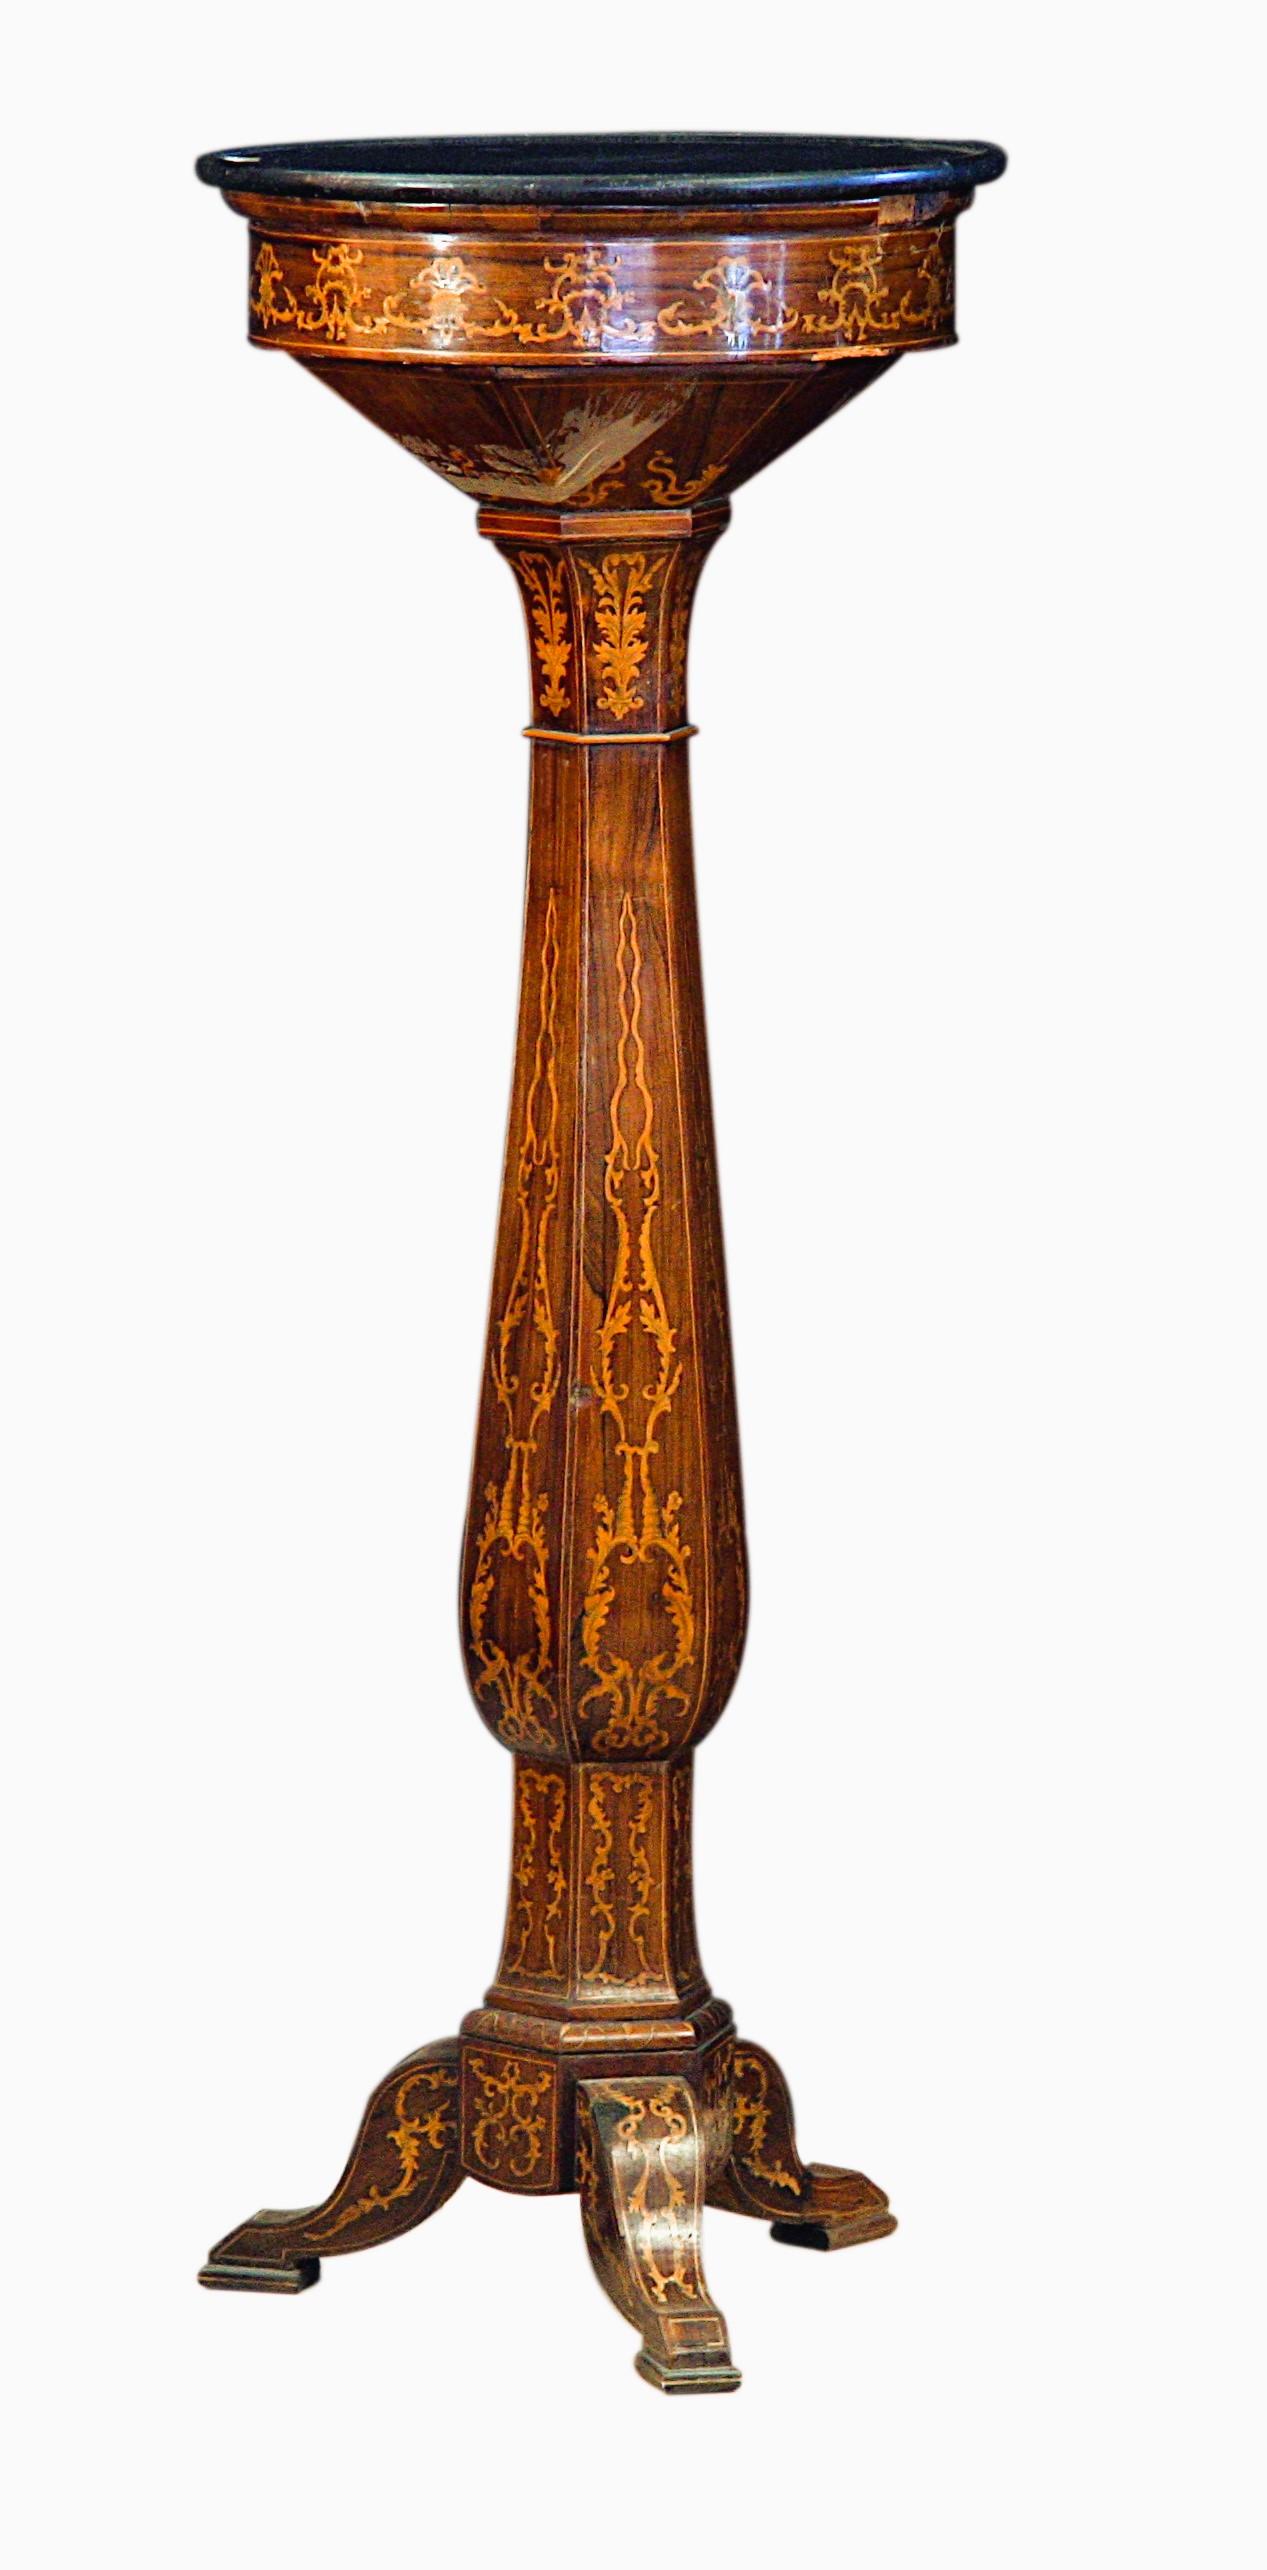 Pair of Charles X-era guéridons,
rosewood veneer richly decorated with fine and elegant lemonwood inlays.
Period: first half of the 1800s

Measurements: 41 cm diameter  - H. cm 112

Code 5131
(SF) 0SM,S 
